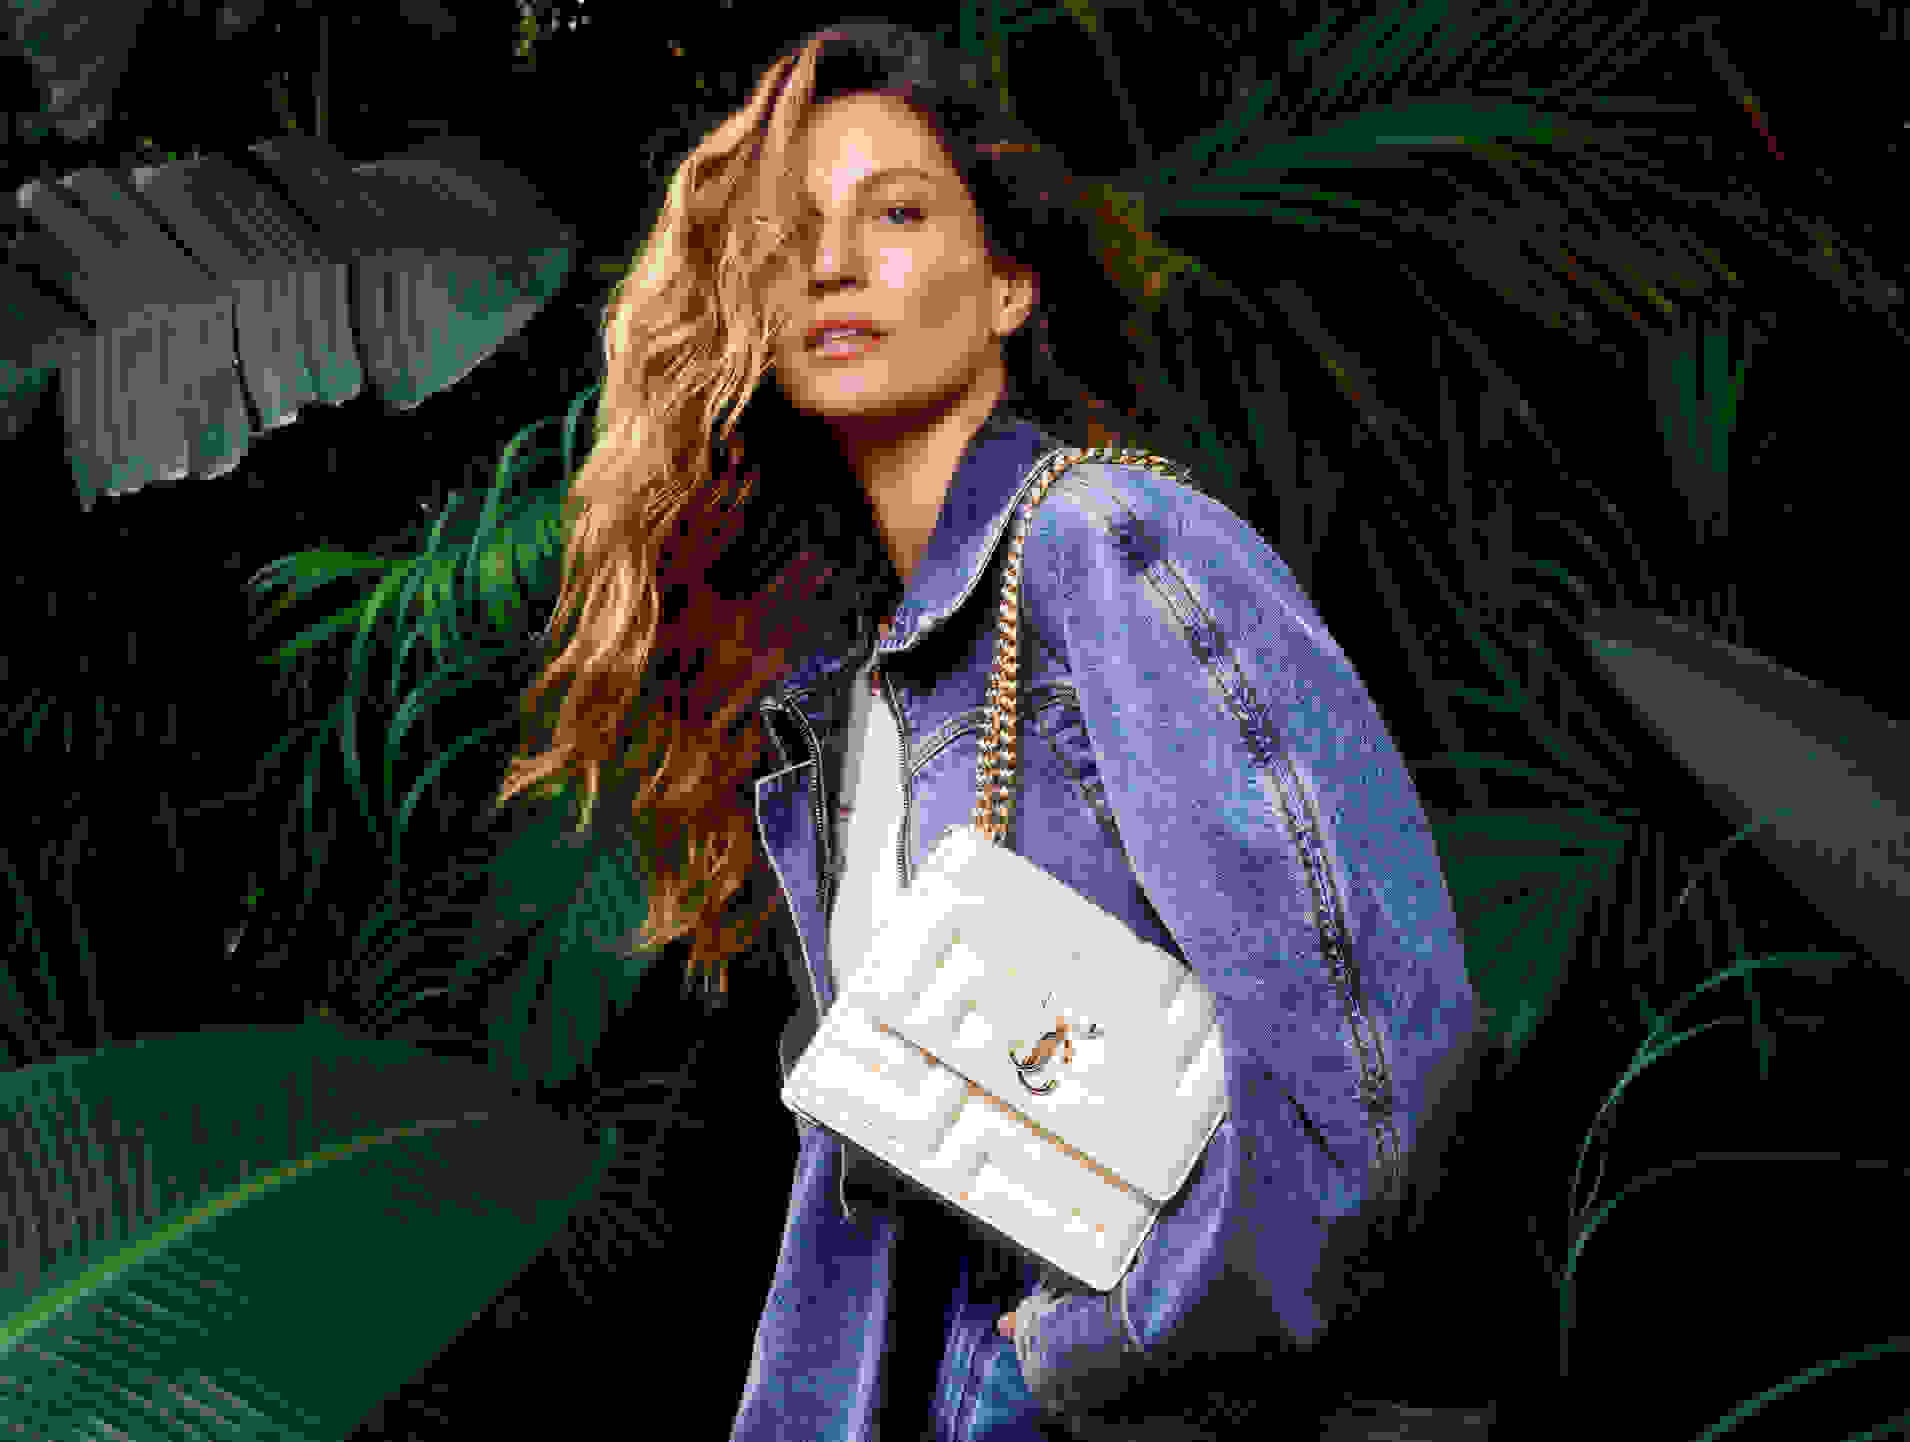 JIMMY CHOO AND VENINI CELEBRATE SALONE DEL MOBILE WITH AN EXCLUSIVE COLLABORATION